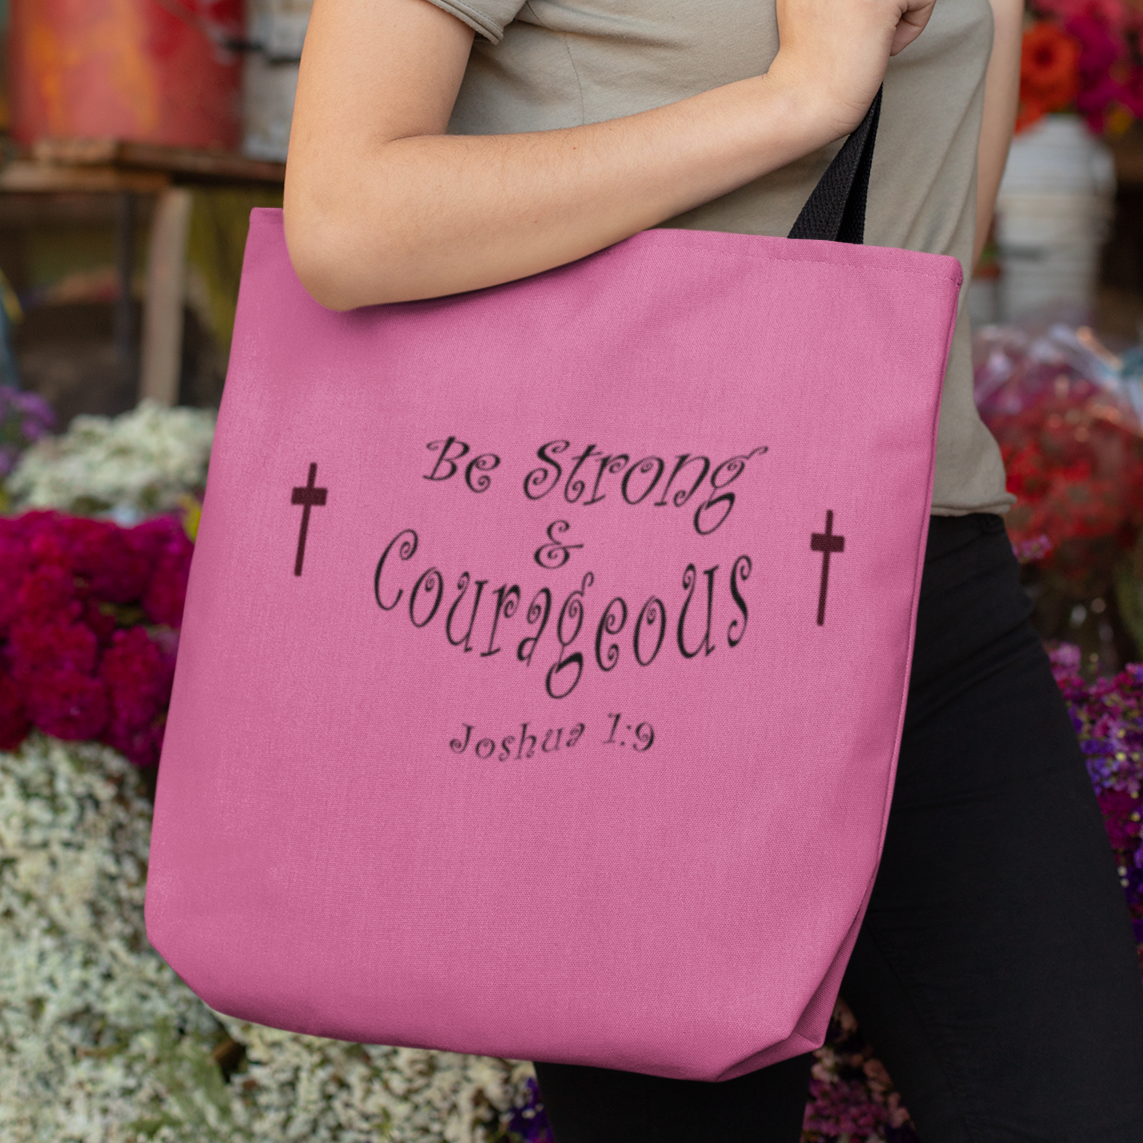 AOP Tote Bag "Be Strong & Courageous" in 3 Sizes (3950333558878)